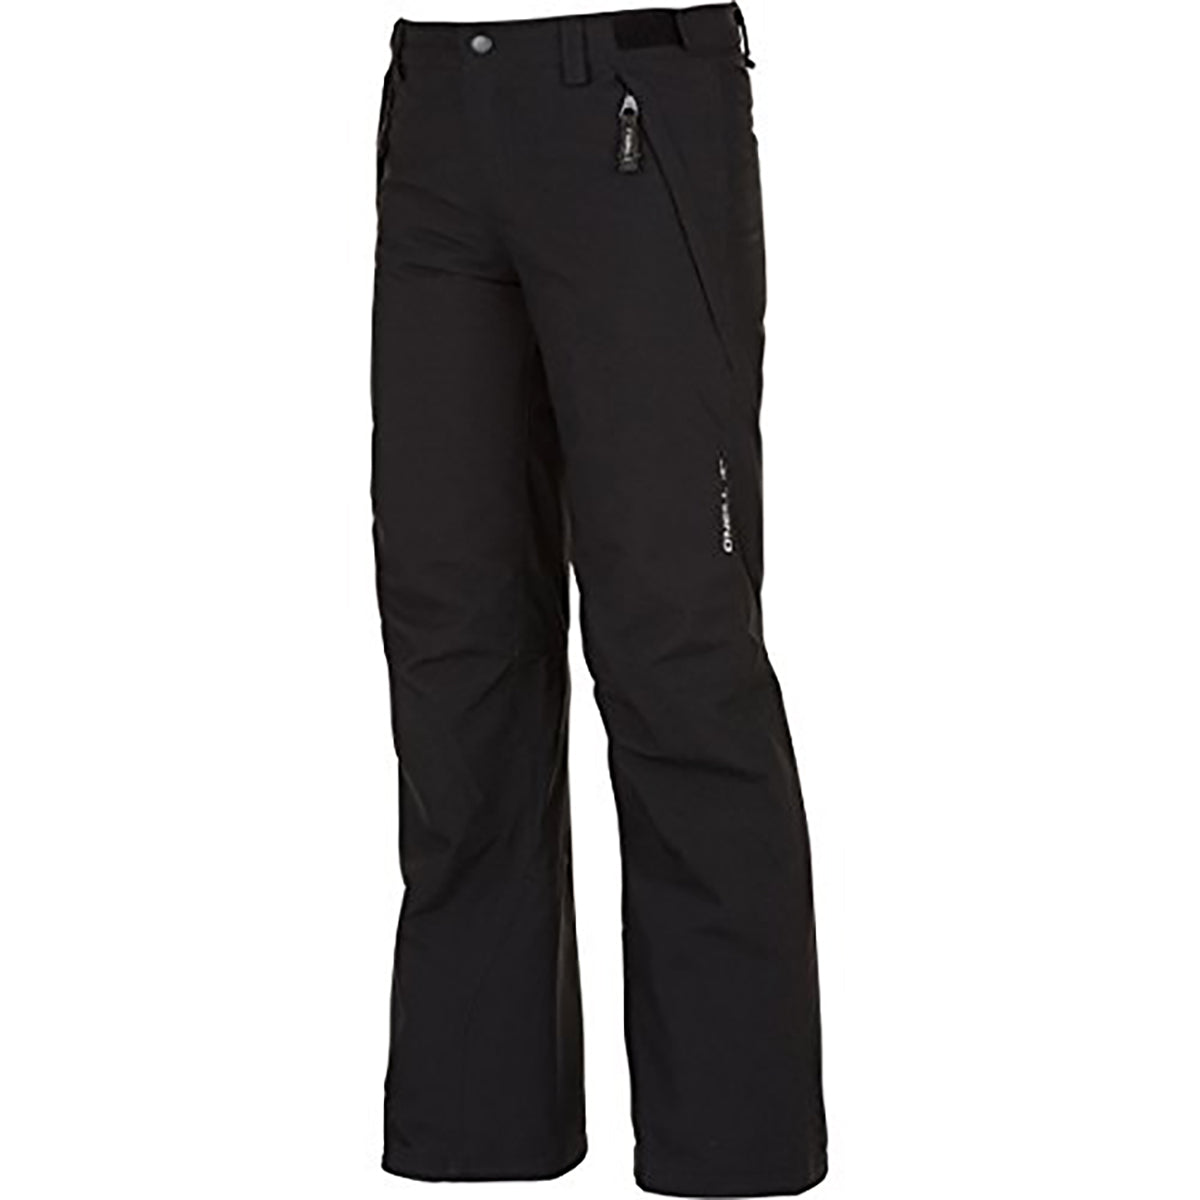 O'Neill Anvil Youth Boys Snow Pants - Black Out